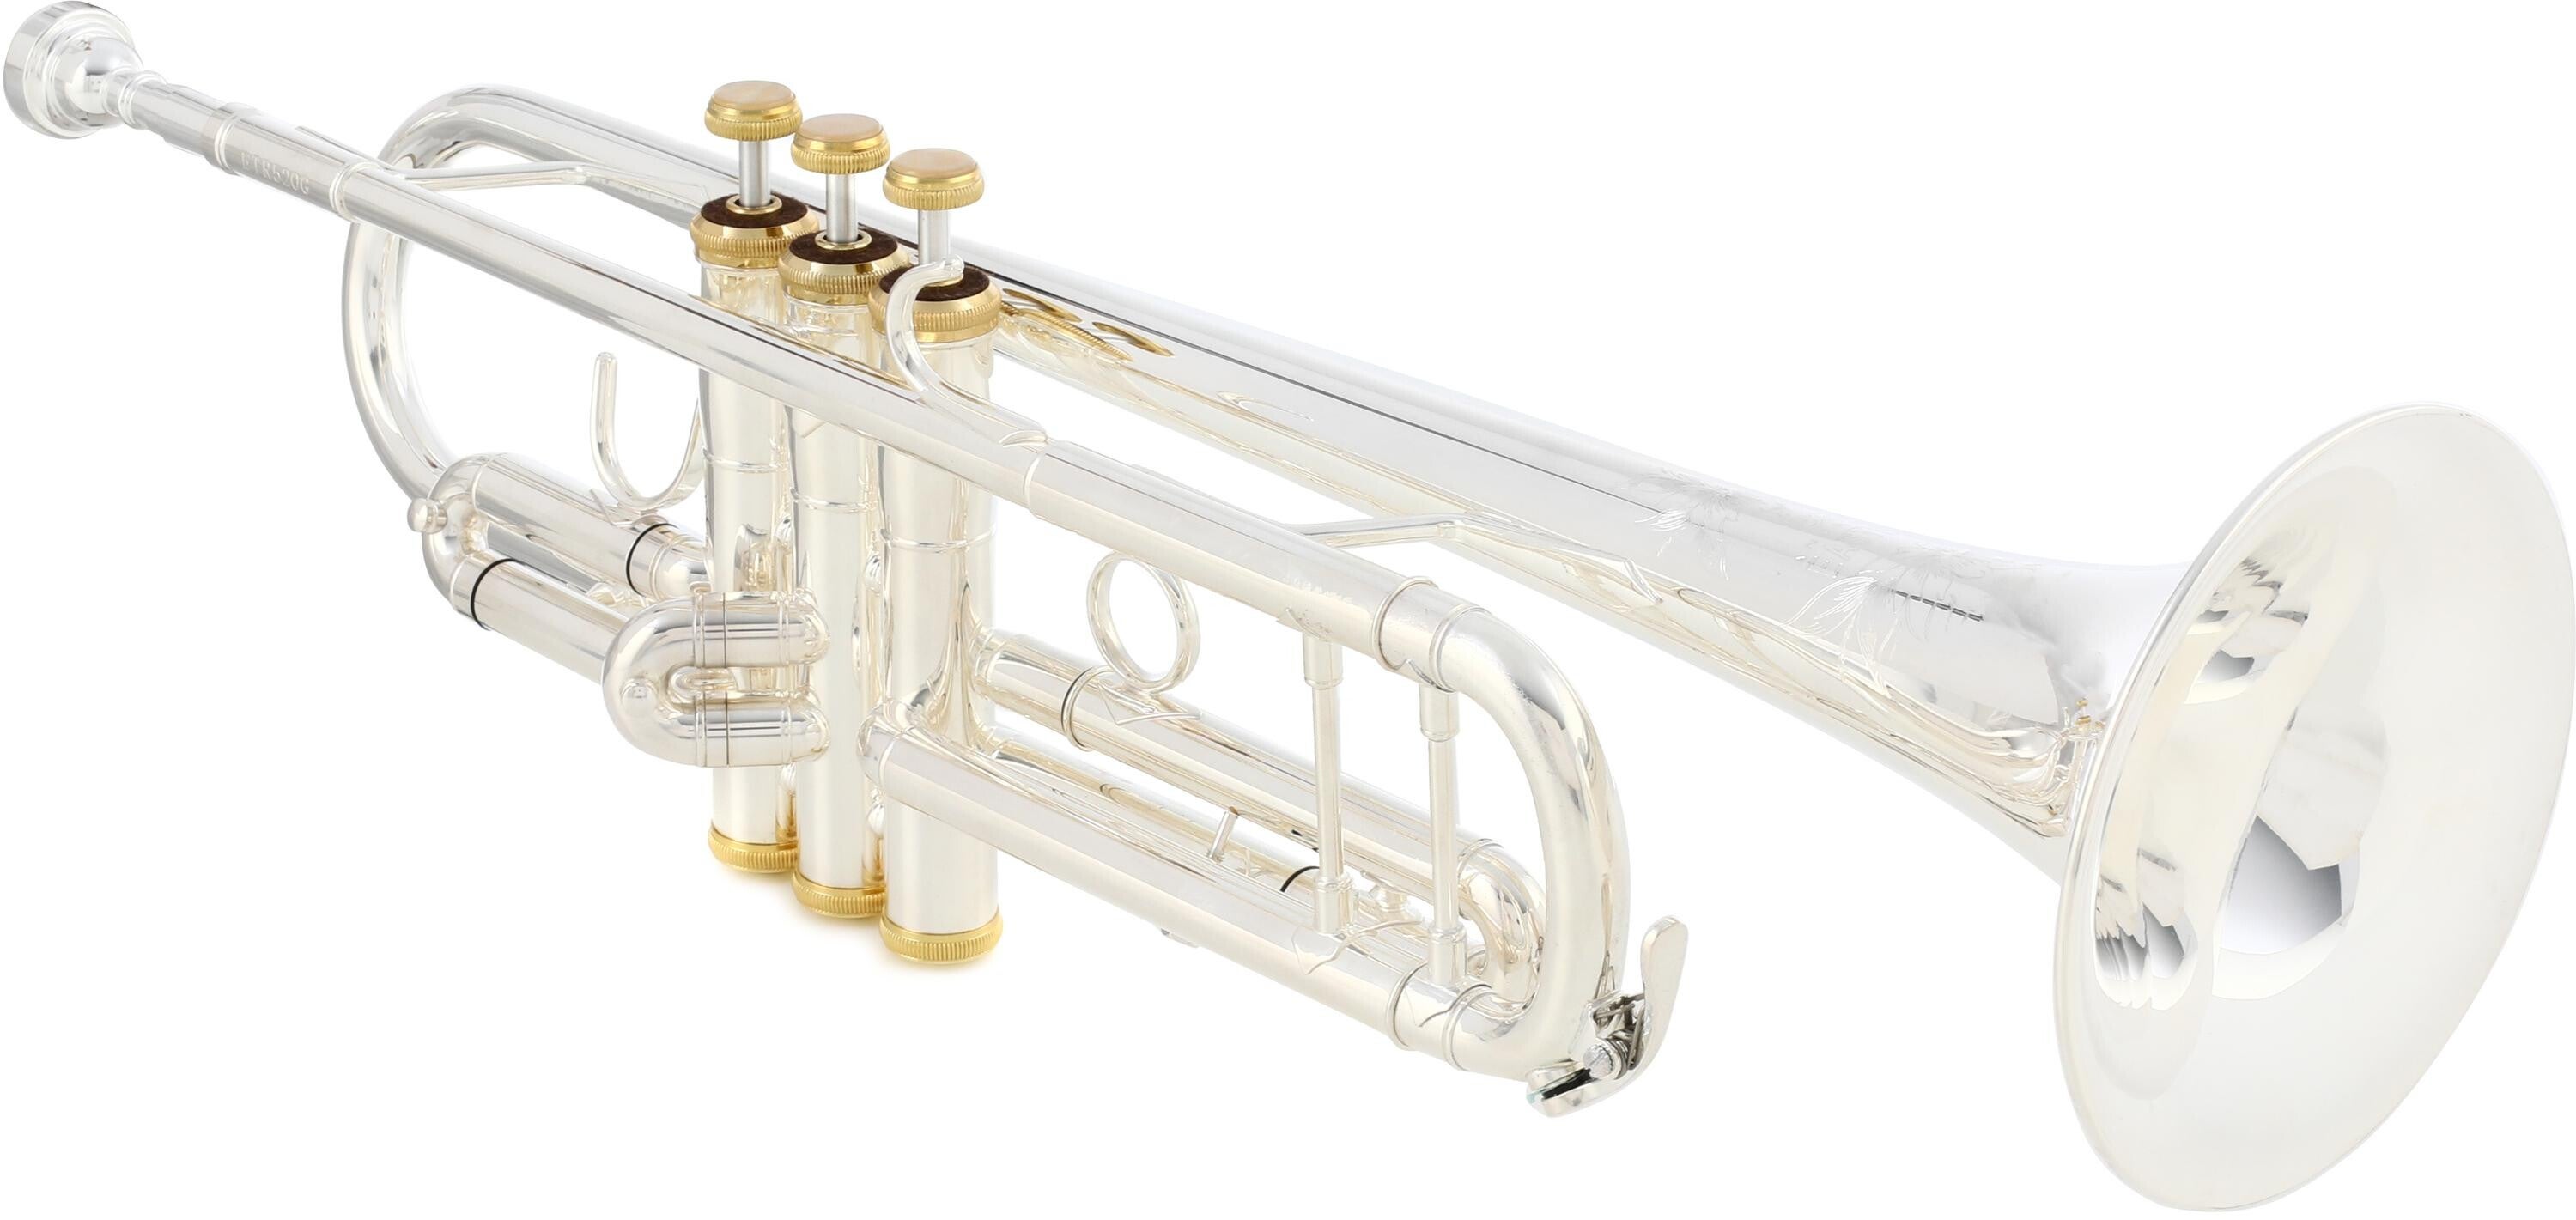 Eastman ETR520GS Intermediate Bb Trumpet - 24k Gold Plated Trim - Silver  Plated Finish